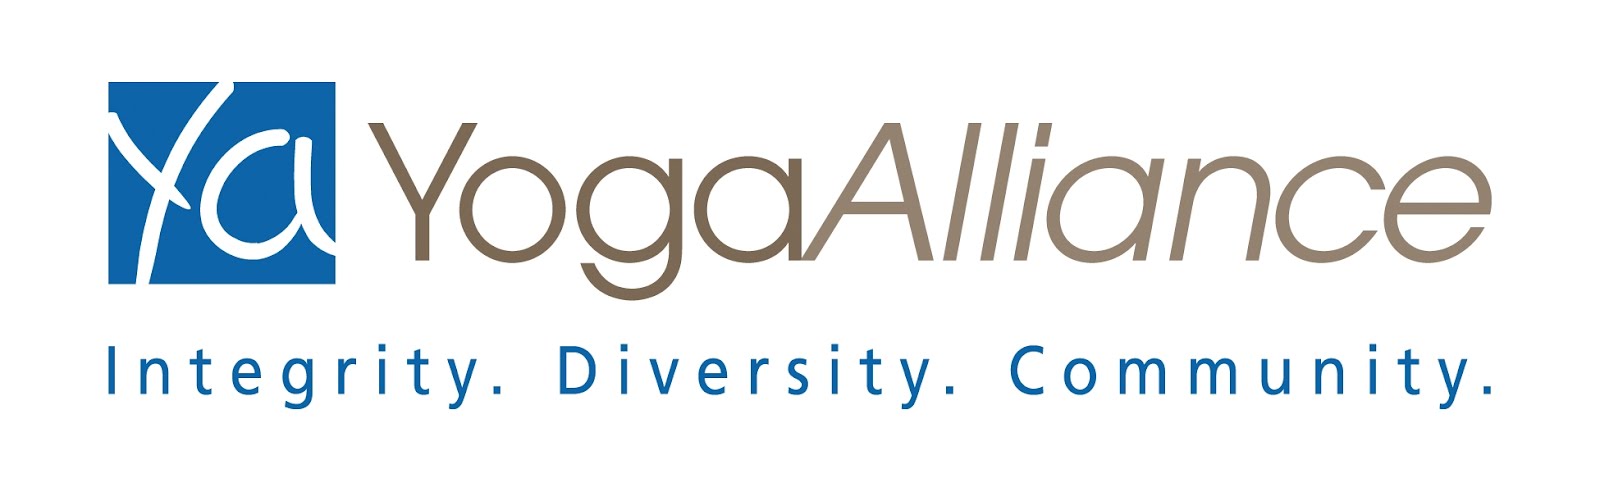 What Is Yoga Alliance  International Society of Precision Agriculture